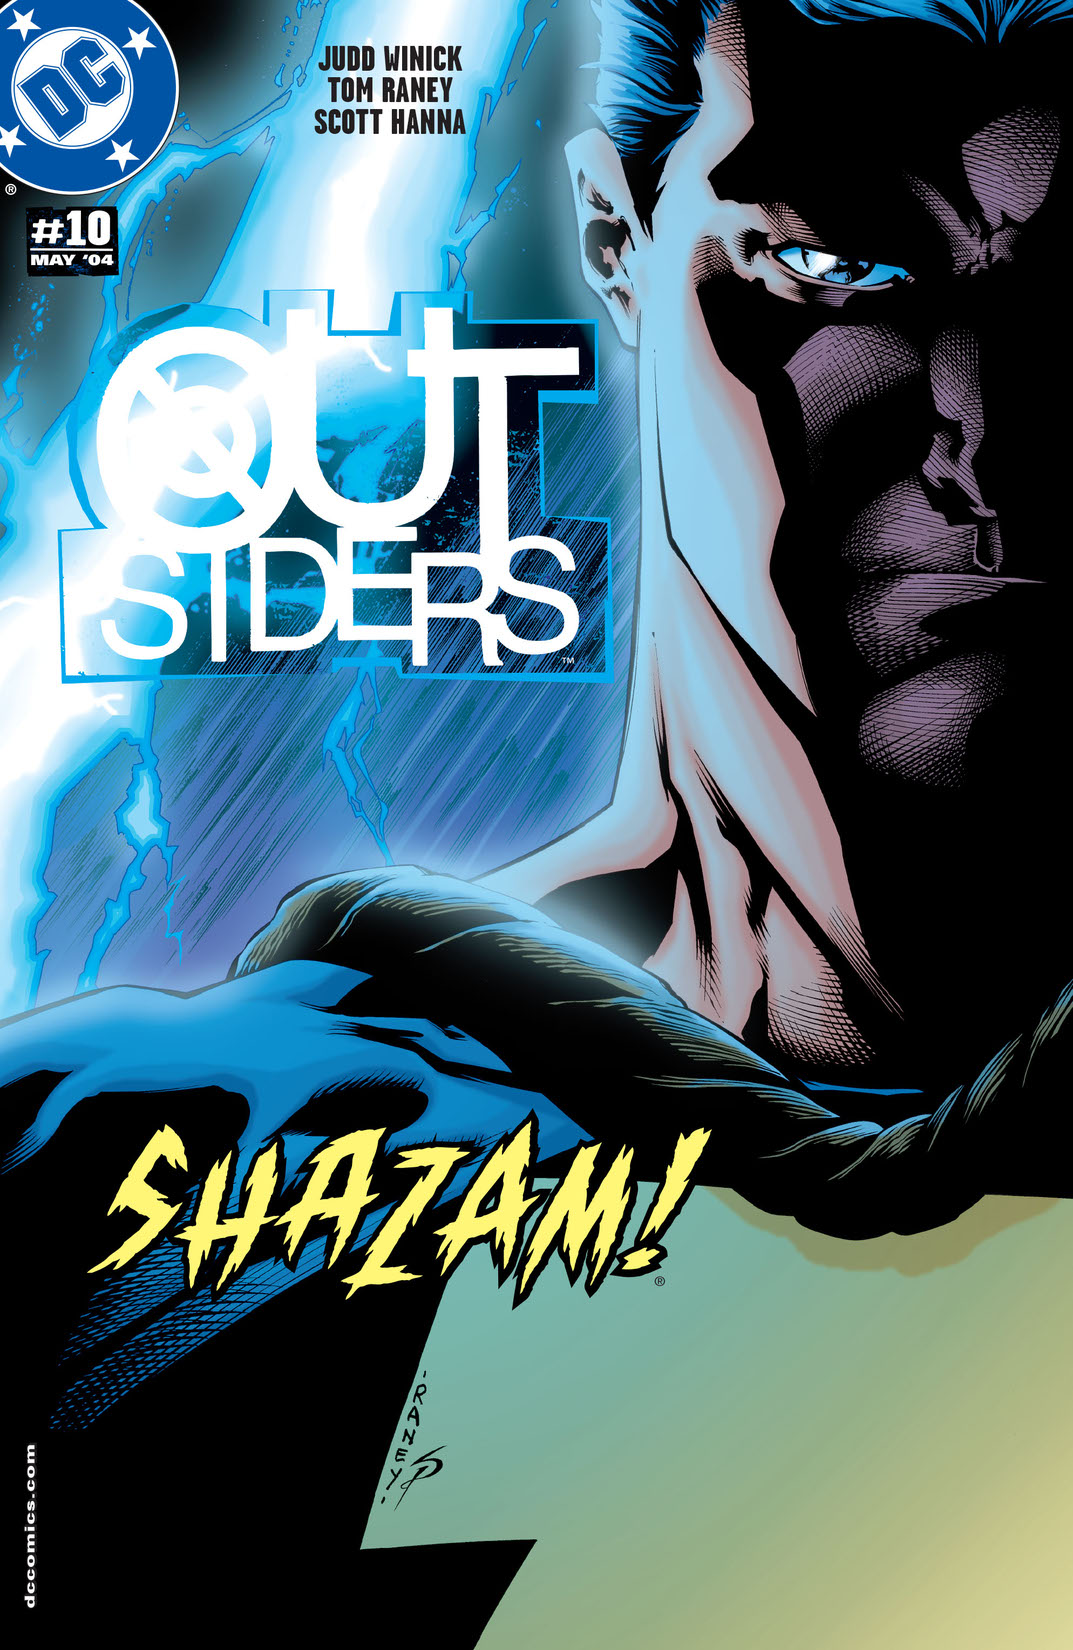 Outsiders (2003-) #10 preview images